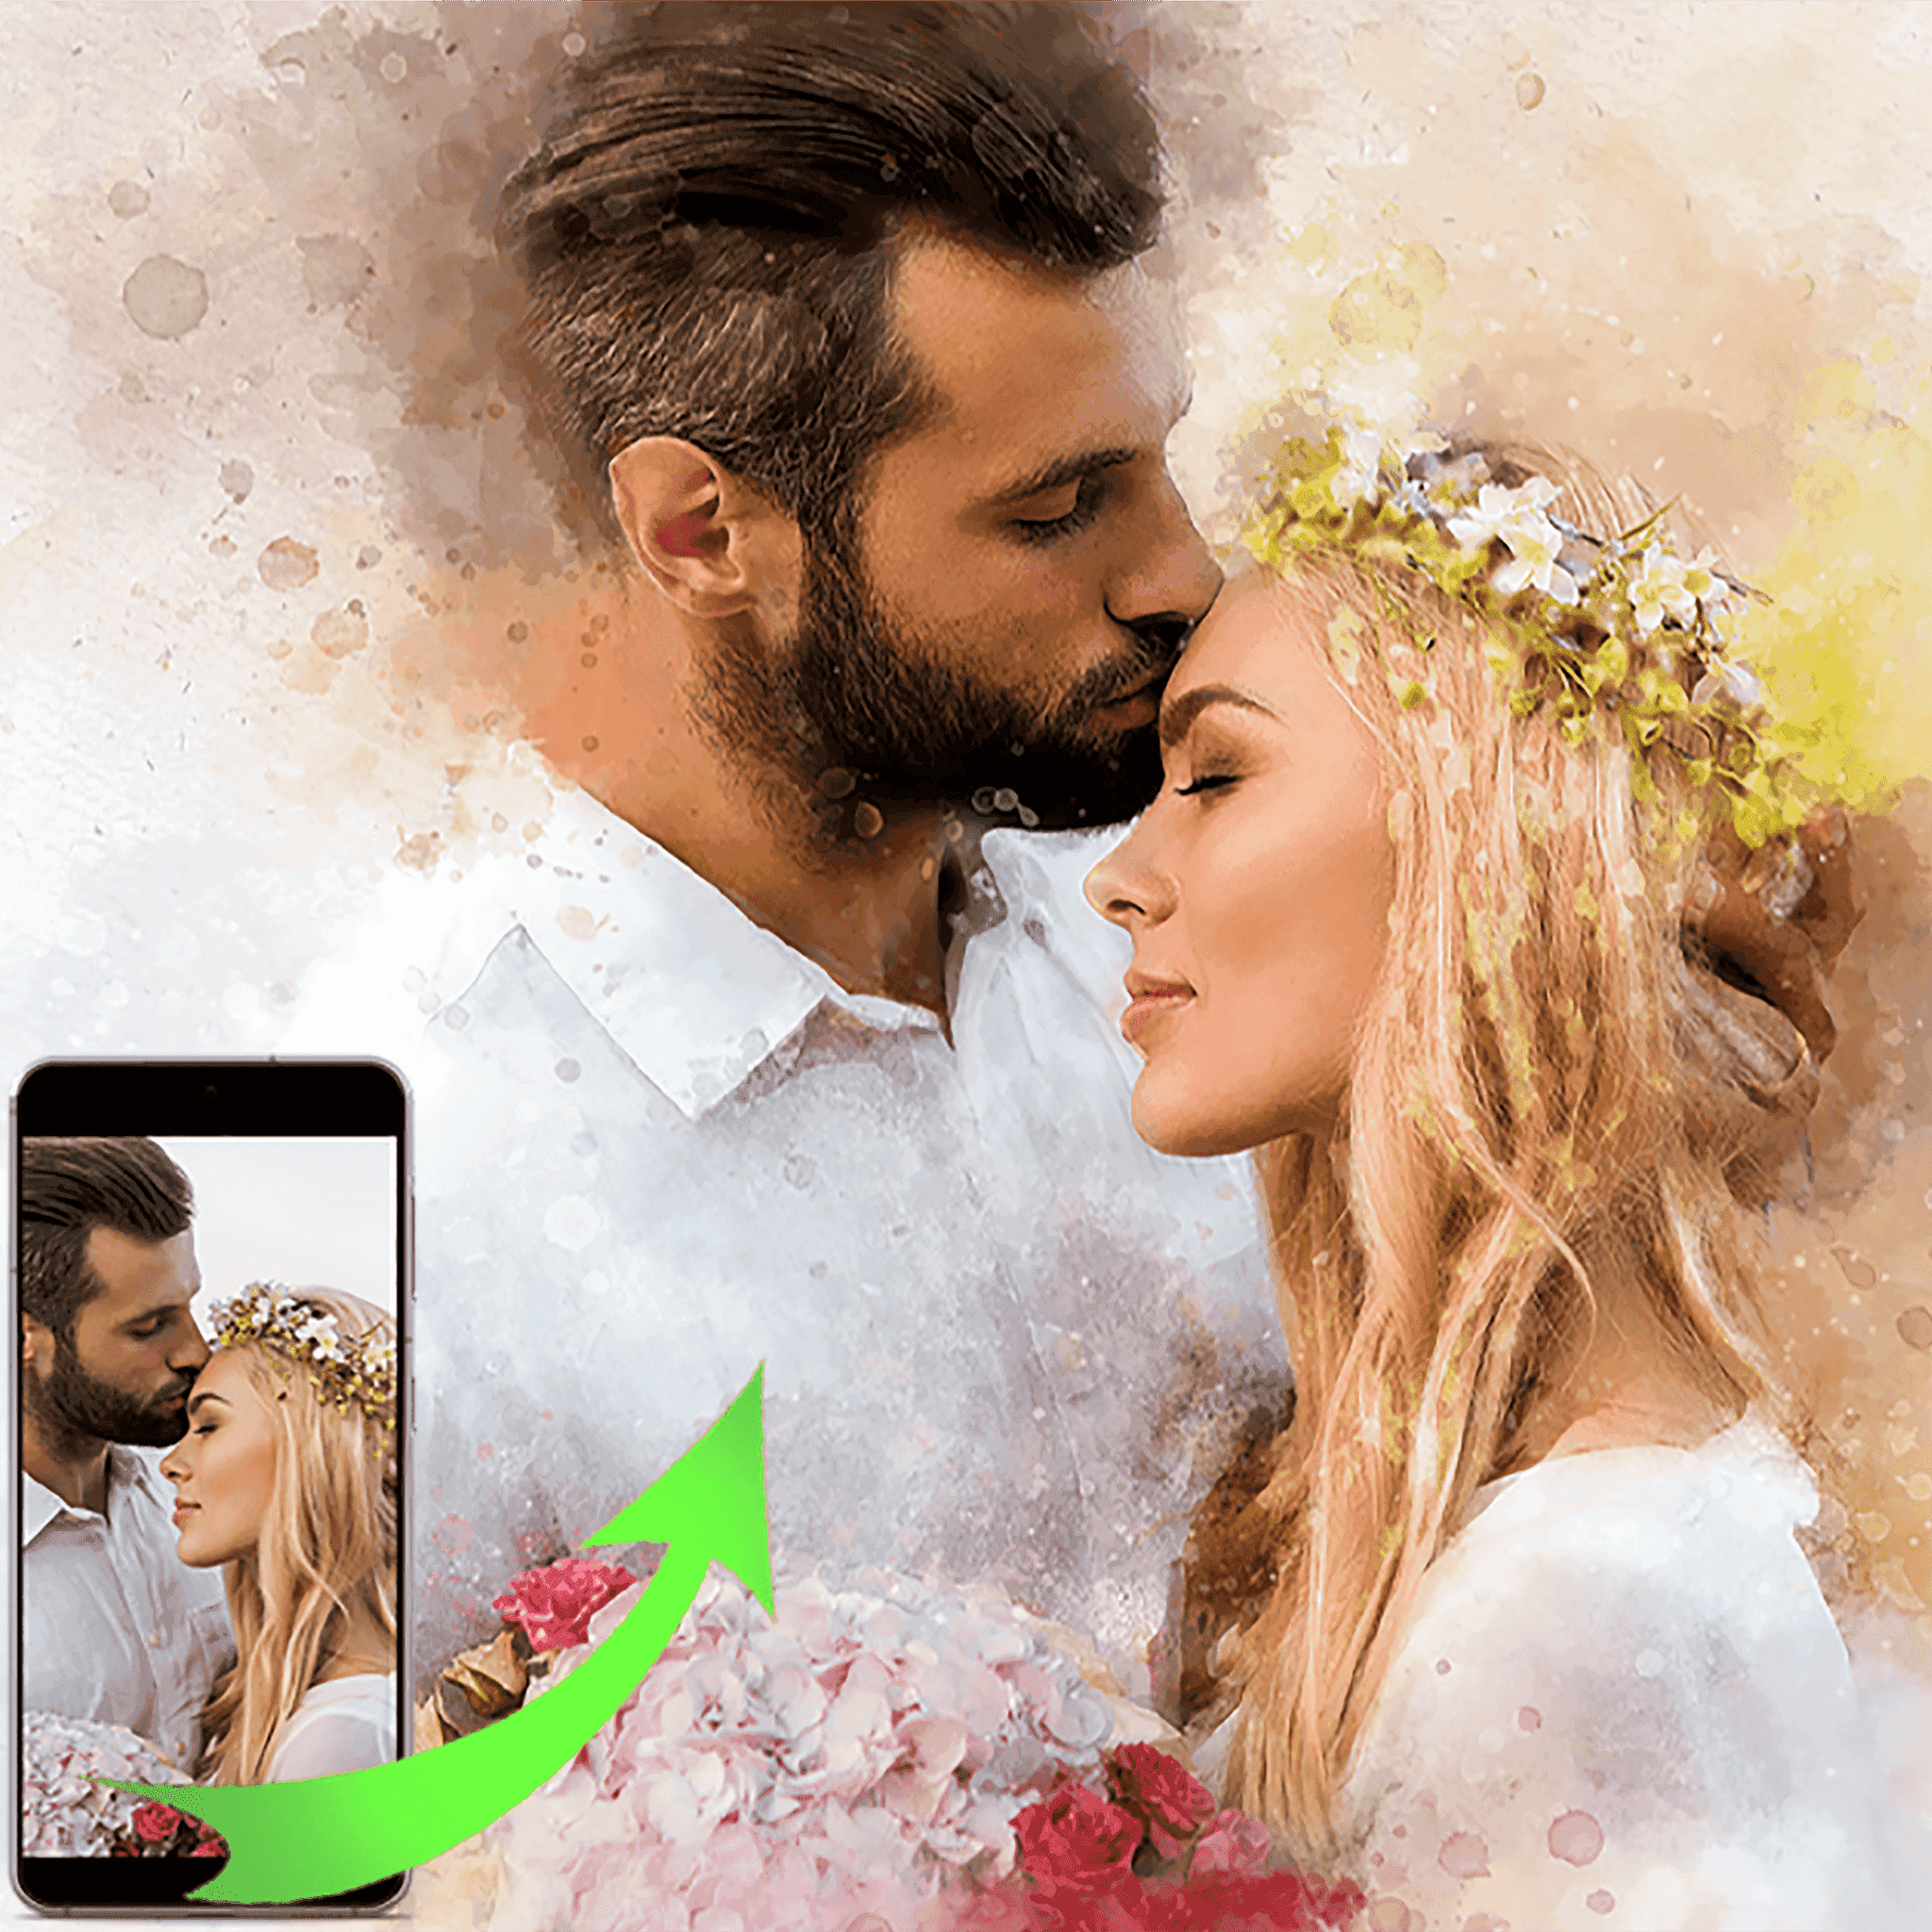 Turn Wedding Photo into Painting ❤️ Custom Portrait from Photo🎨🖌️ - FromPicToArt